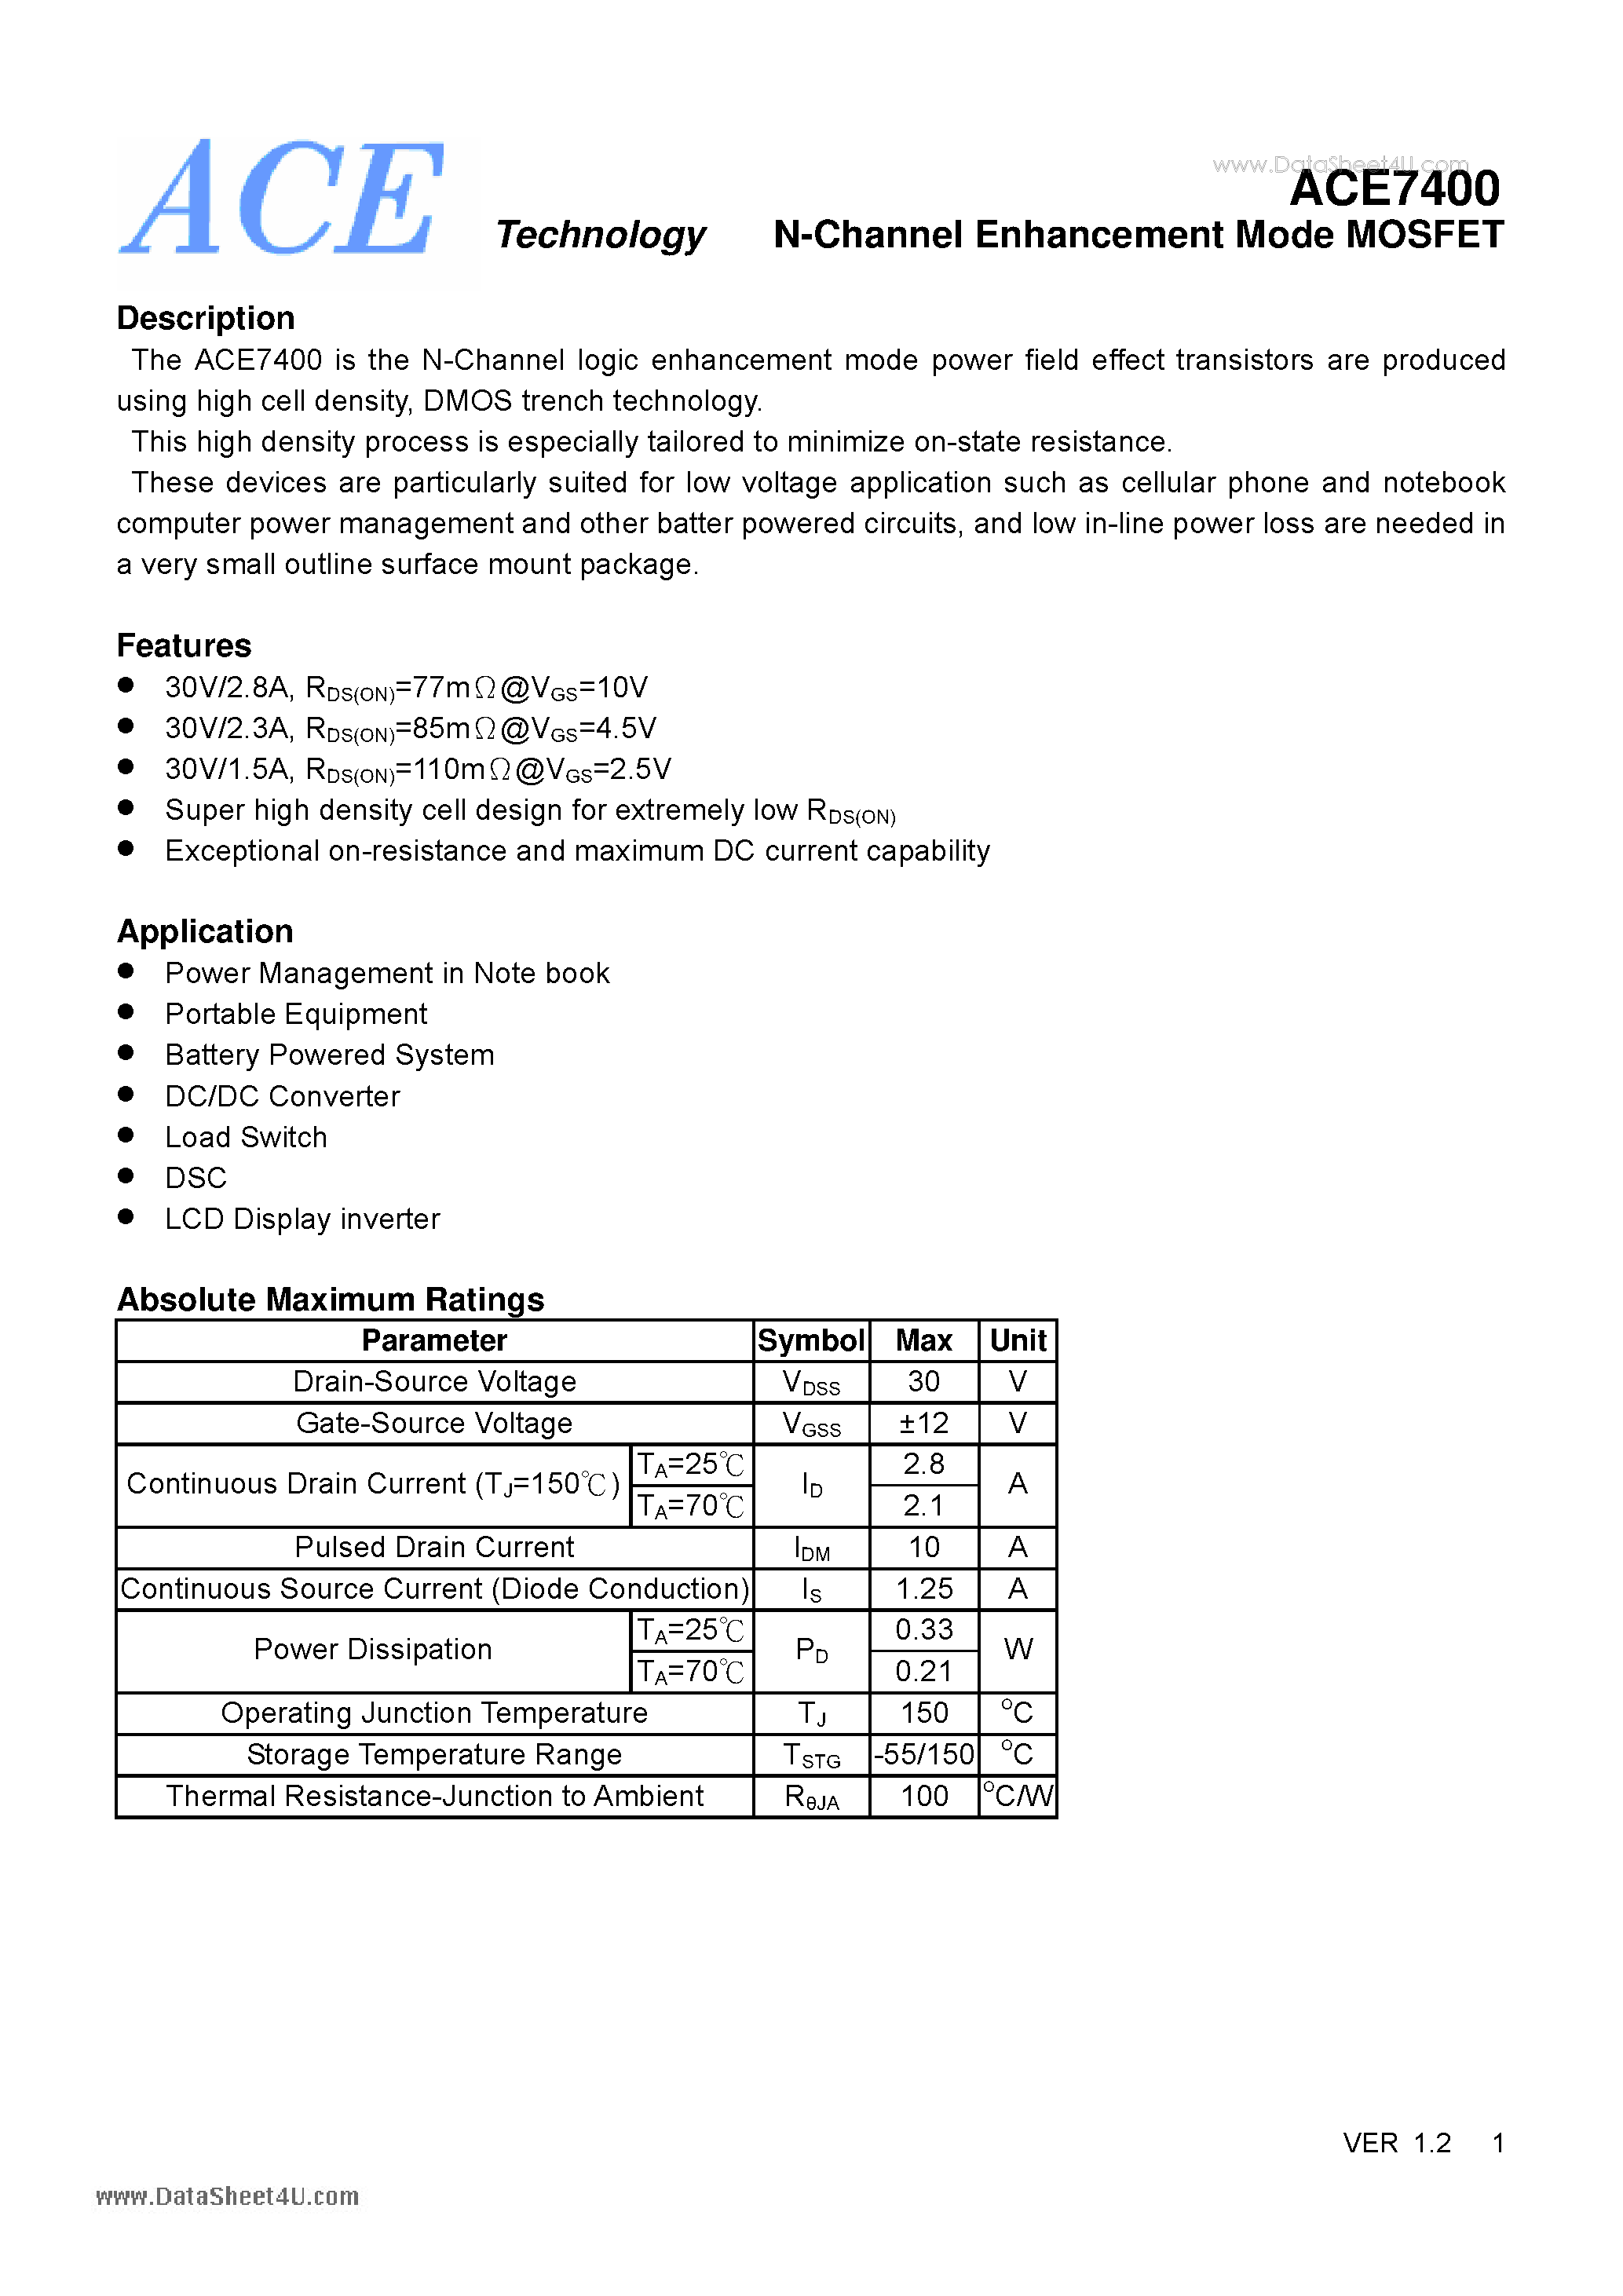 Datasheet ACE7400 - N-Channel Enhancement Mode MOSFET page 1